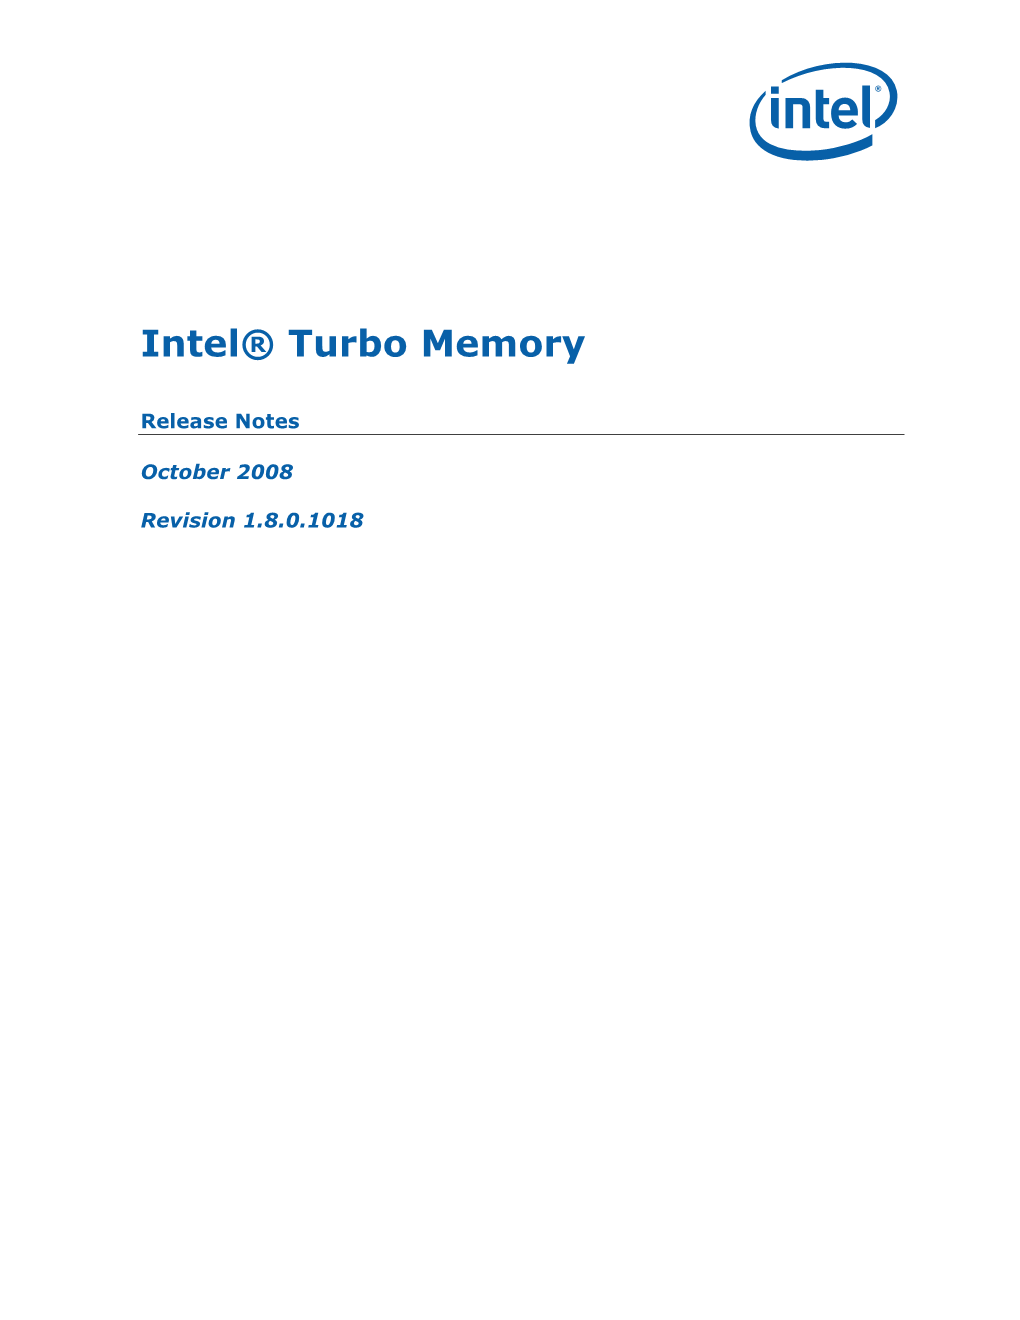 Release Notes for Intel(R) Turbo Memory V1.7